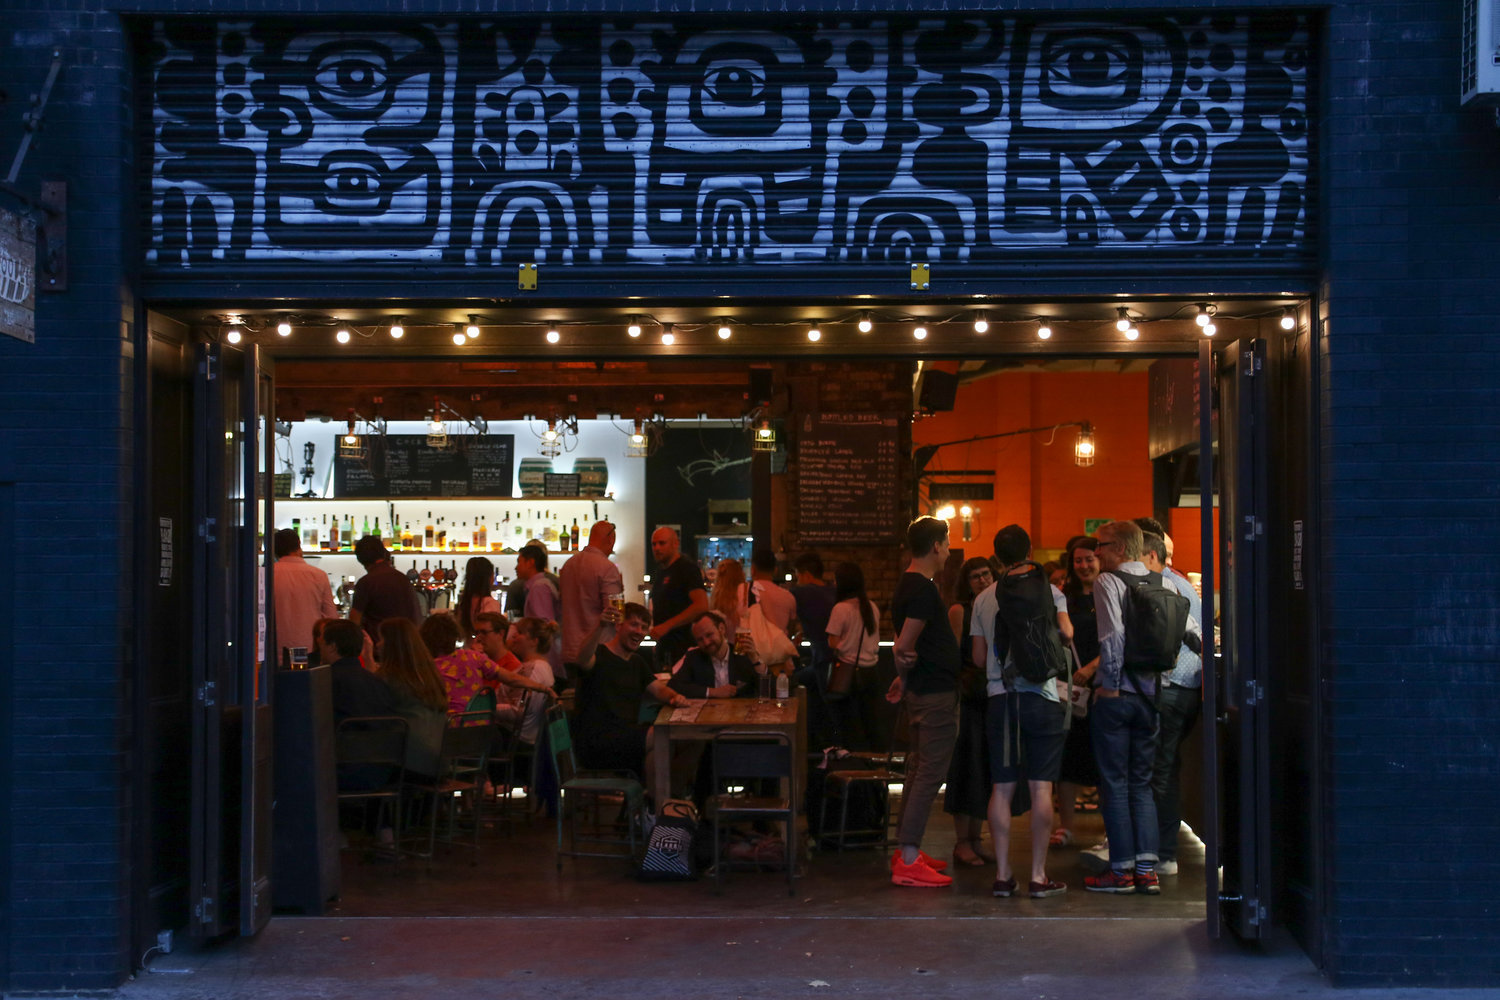 People pack into the warehouse-like space of Doodle Bar, visible under warm lights and a blue metal awning.